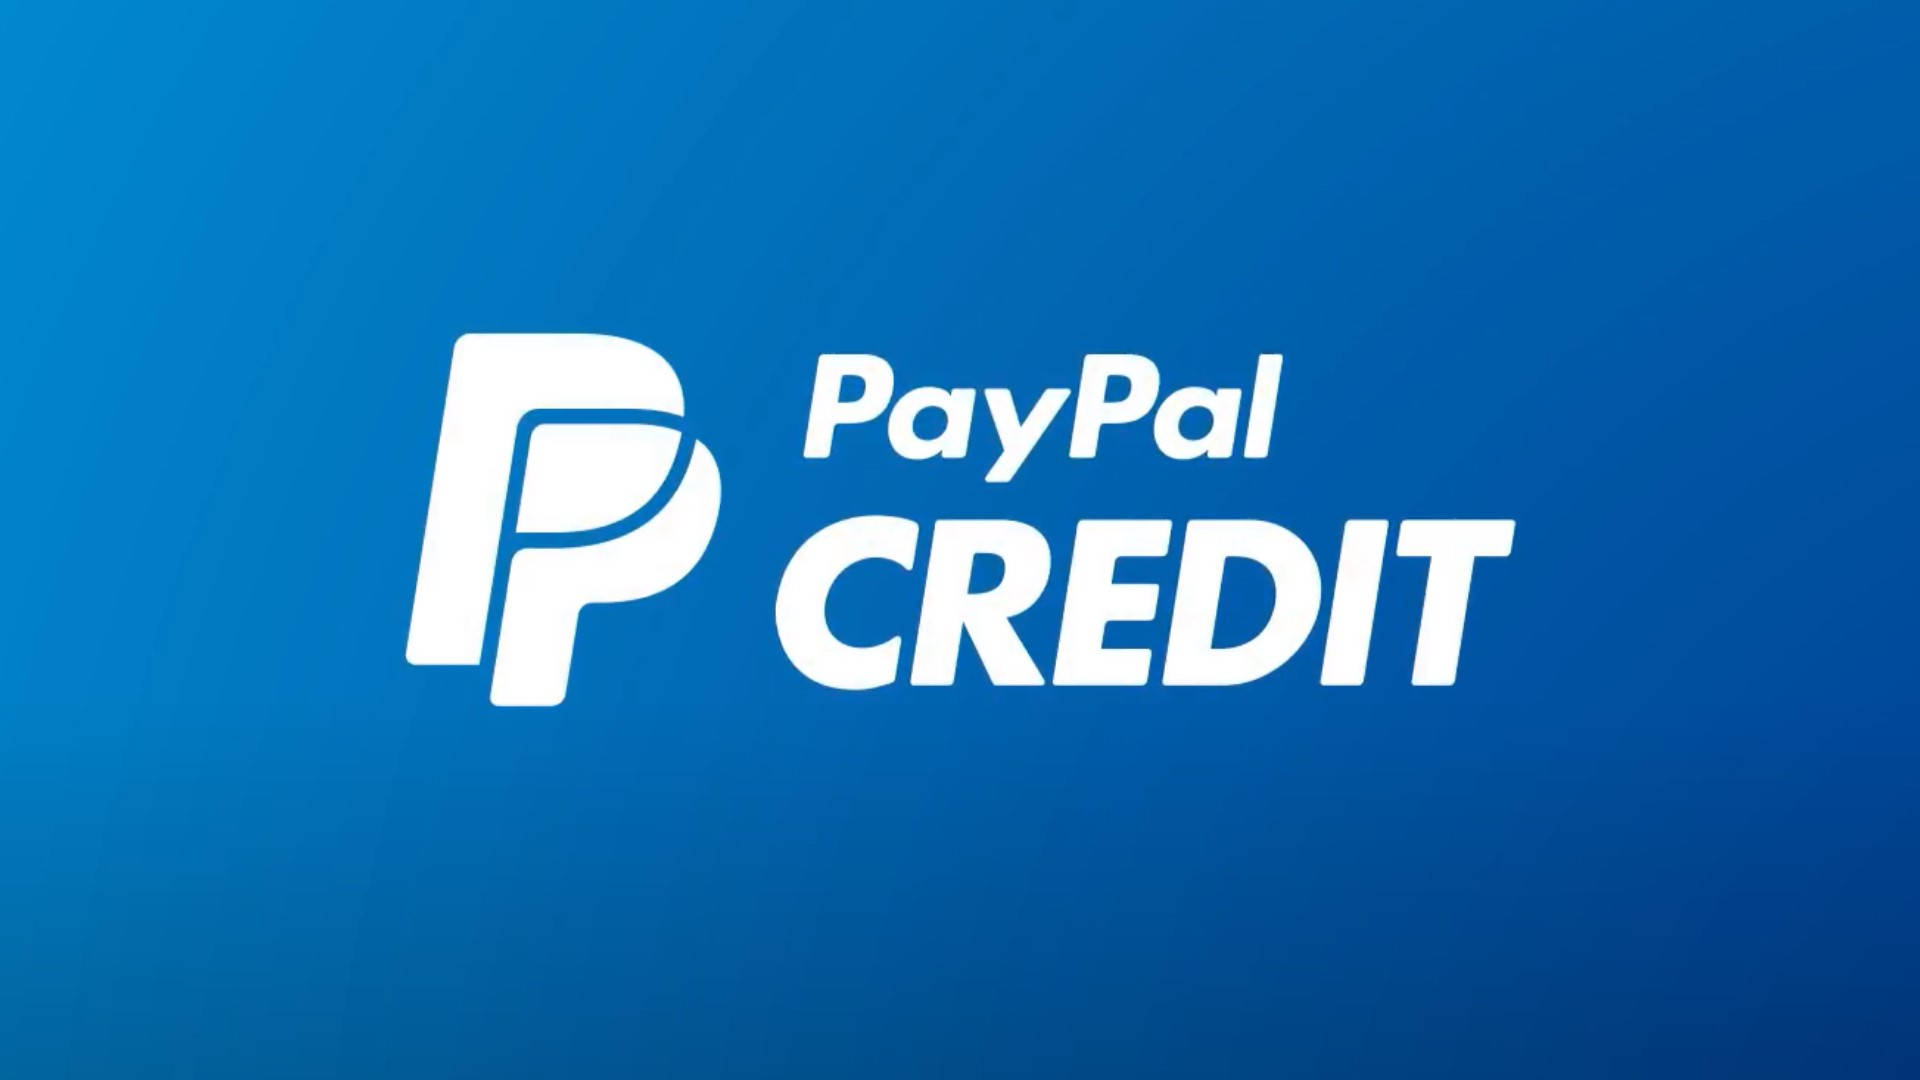 Paypal Credit Logo On A Blue Background Background